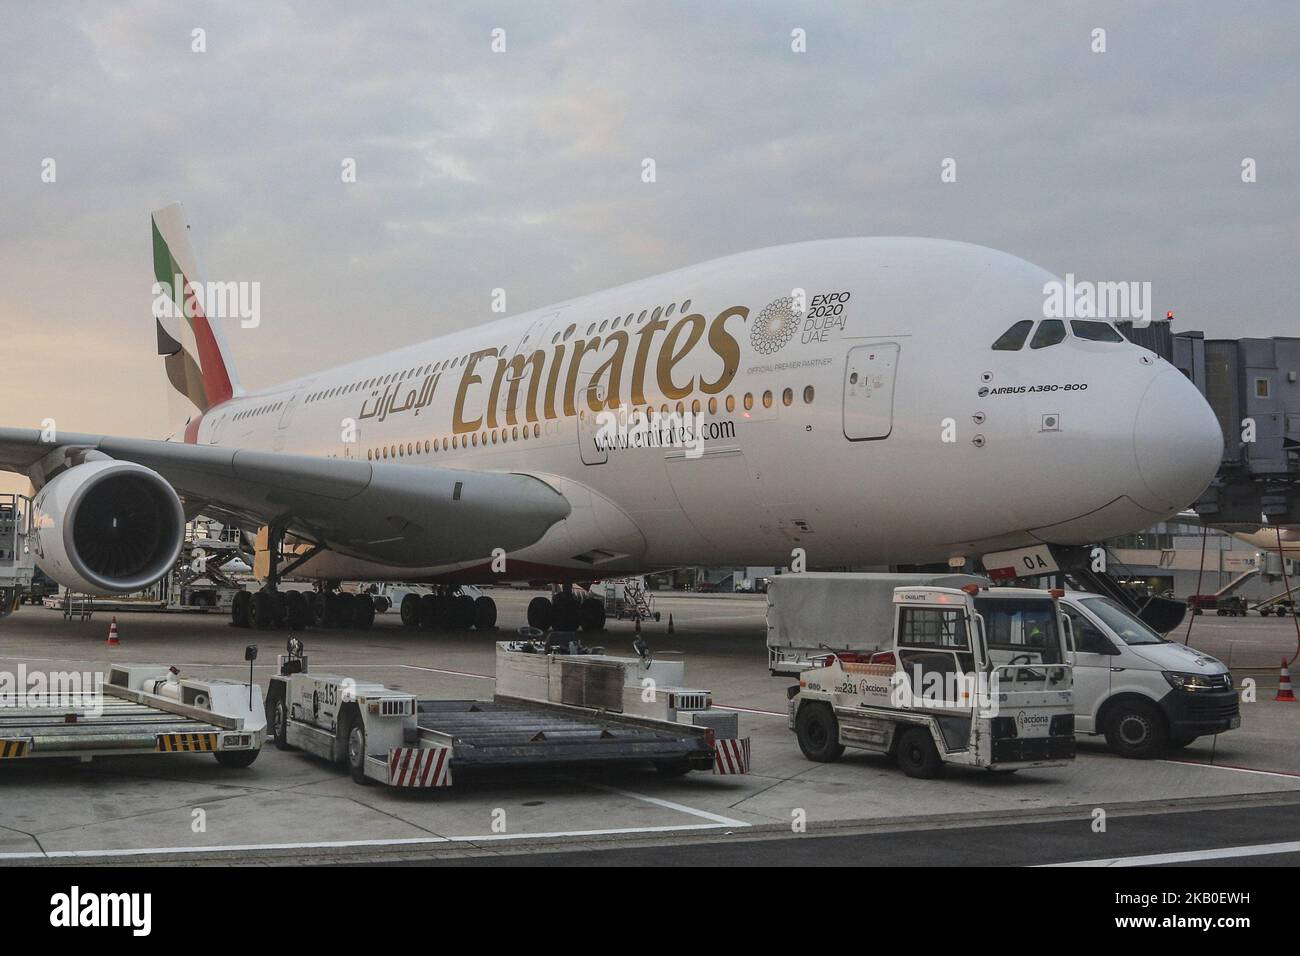 Emirates Airbus A380 docked at Dusseldorf Airport in Germany on August 21, 2018. The double-decker airplane as seen during the golden hour in Dusseldorf airport. Emirates operates 2 daily flights with A380 from Dubai International DXB airport, UAE to Dusseldorf International, DUS airport, Germany, flights EK55 and return to Dubai EK 56 and EK57 and return EK 58. Emirates is the largest Airbus A380-800 operator with a fleet of 104 airplanes and 58 more in order. (Photo by Nicolas Economou/NurPhoto) Stock Photo